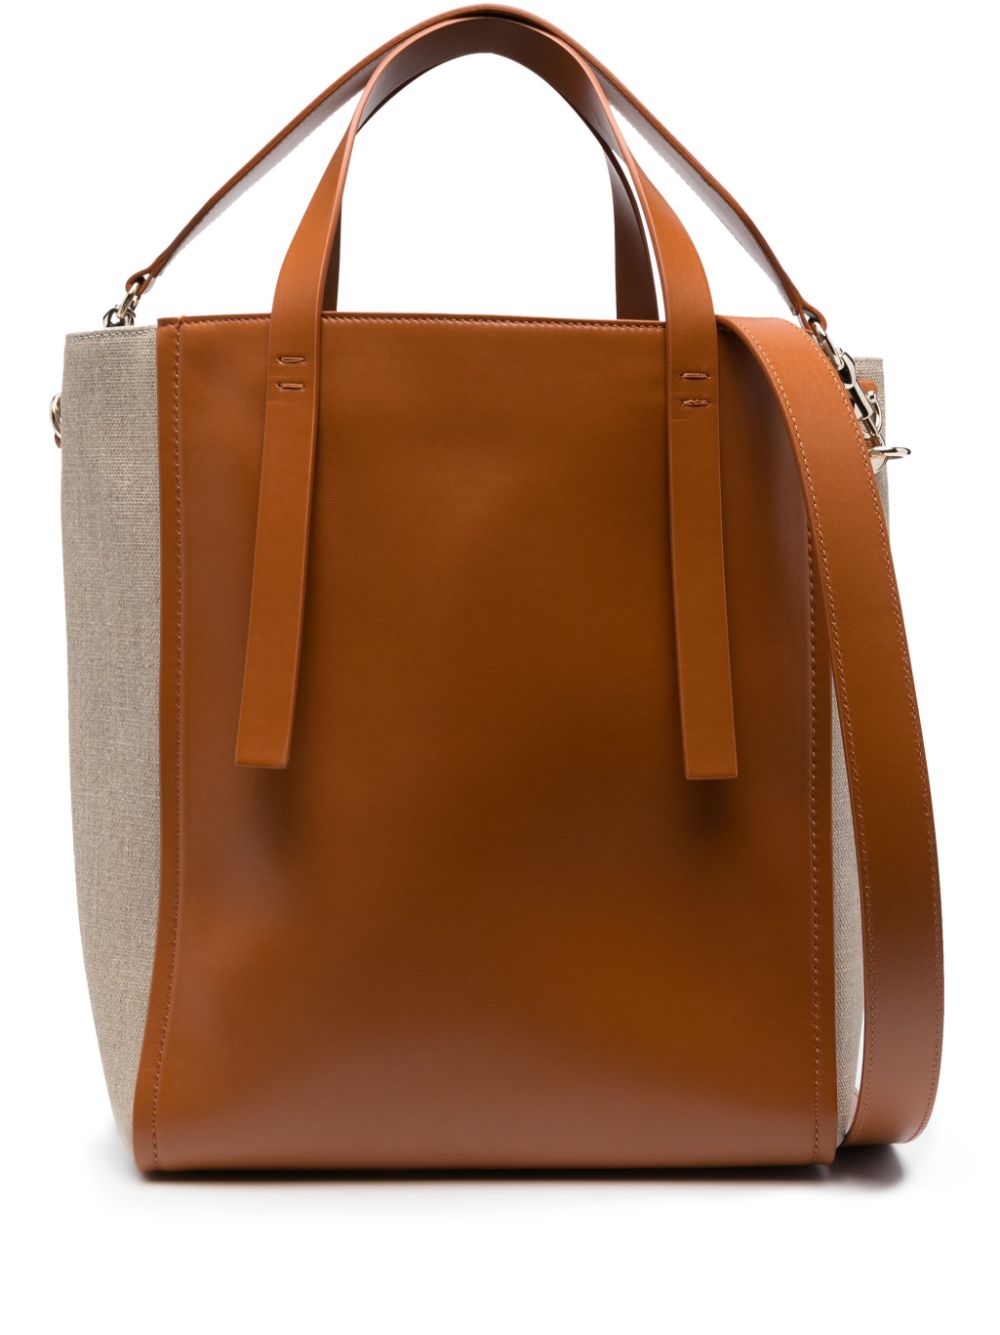 CHLOÉ Sense Medium Two-Tone Leather Tote with Embroidered Logo and Detachable Strap